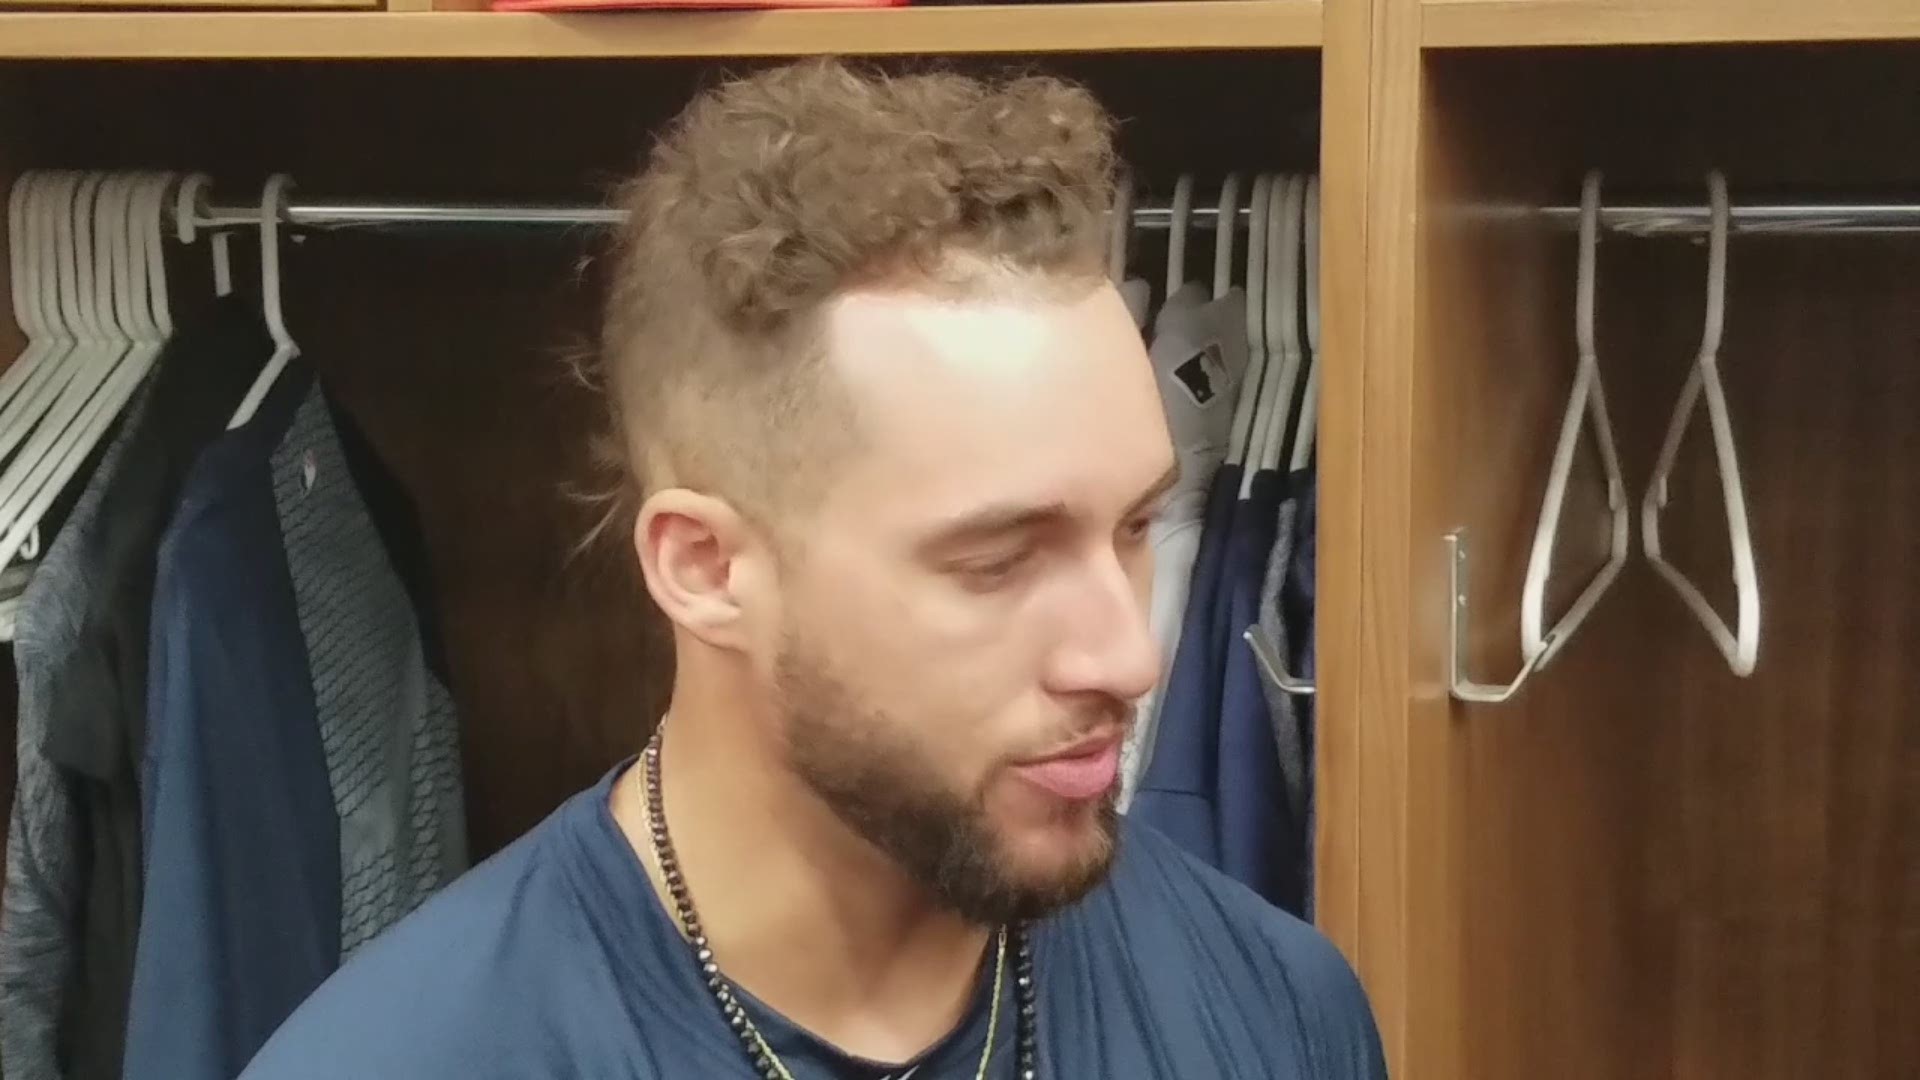 George Springer spoke about teammates Jose Altuve and Jake Marisnick Monday morning just before the team first full squad workout.